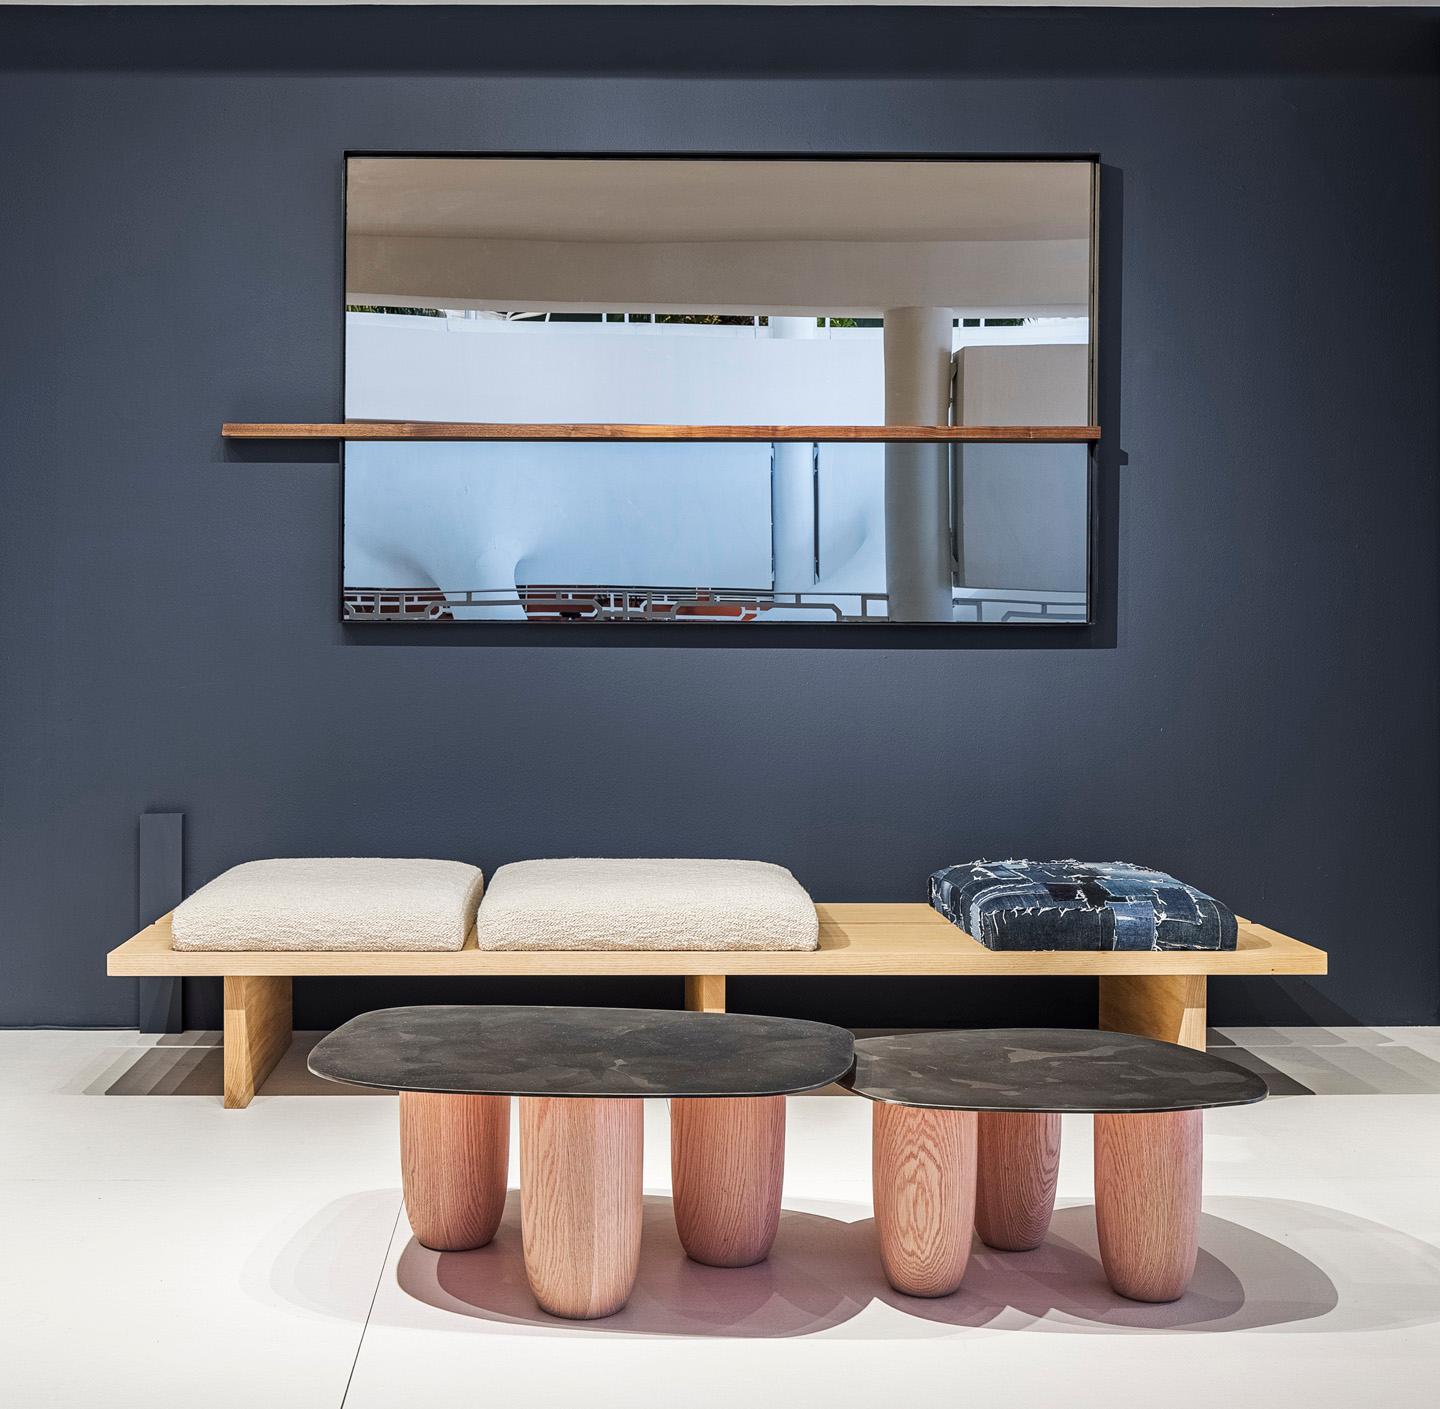 Our contemporary Sumo low tables were introduced at Design Miami 2020. This design was influenced by Japanese minimalist aesthetics and very much inspired by the revered master Isamu Noguchi. The qualities of the design resemble a softened stone as